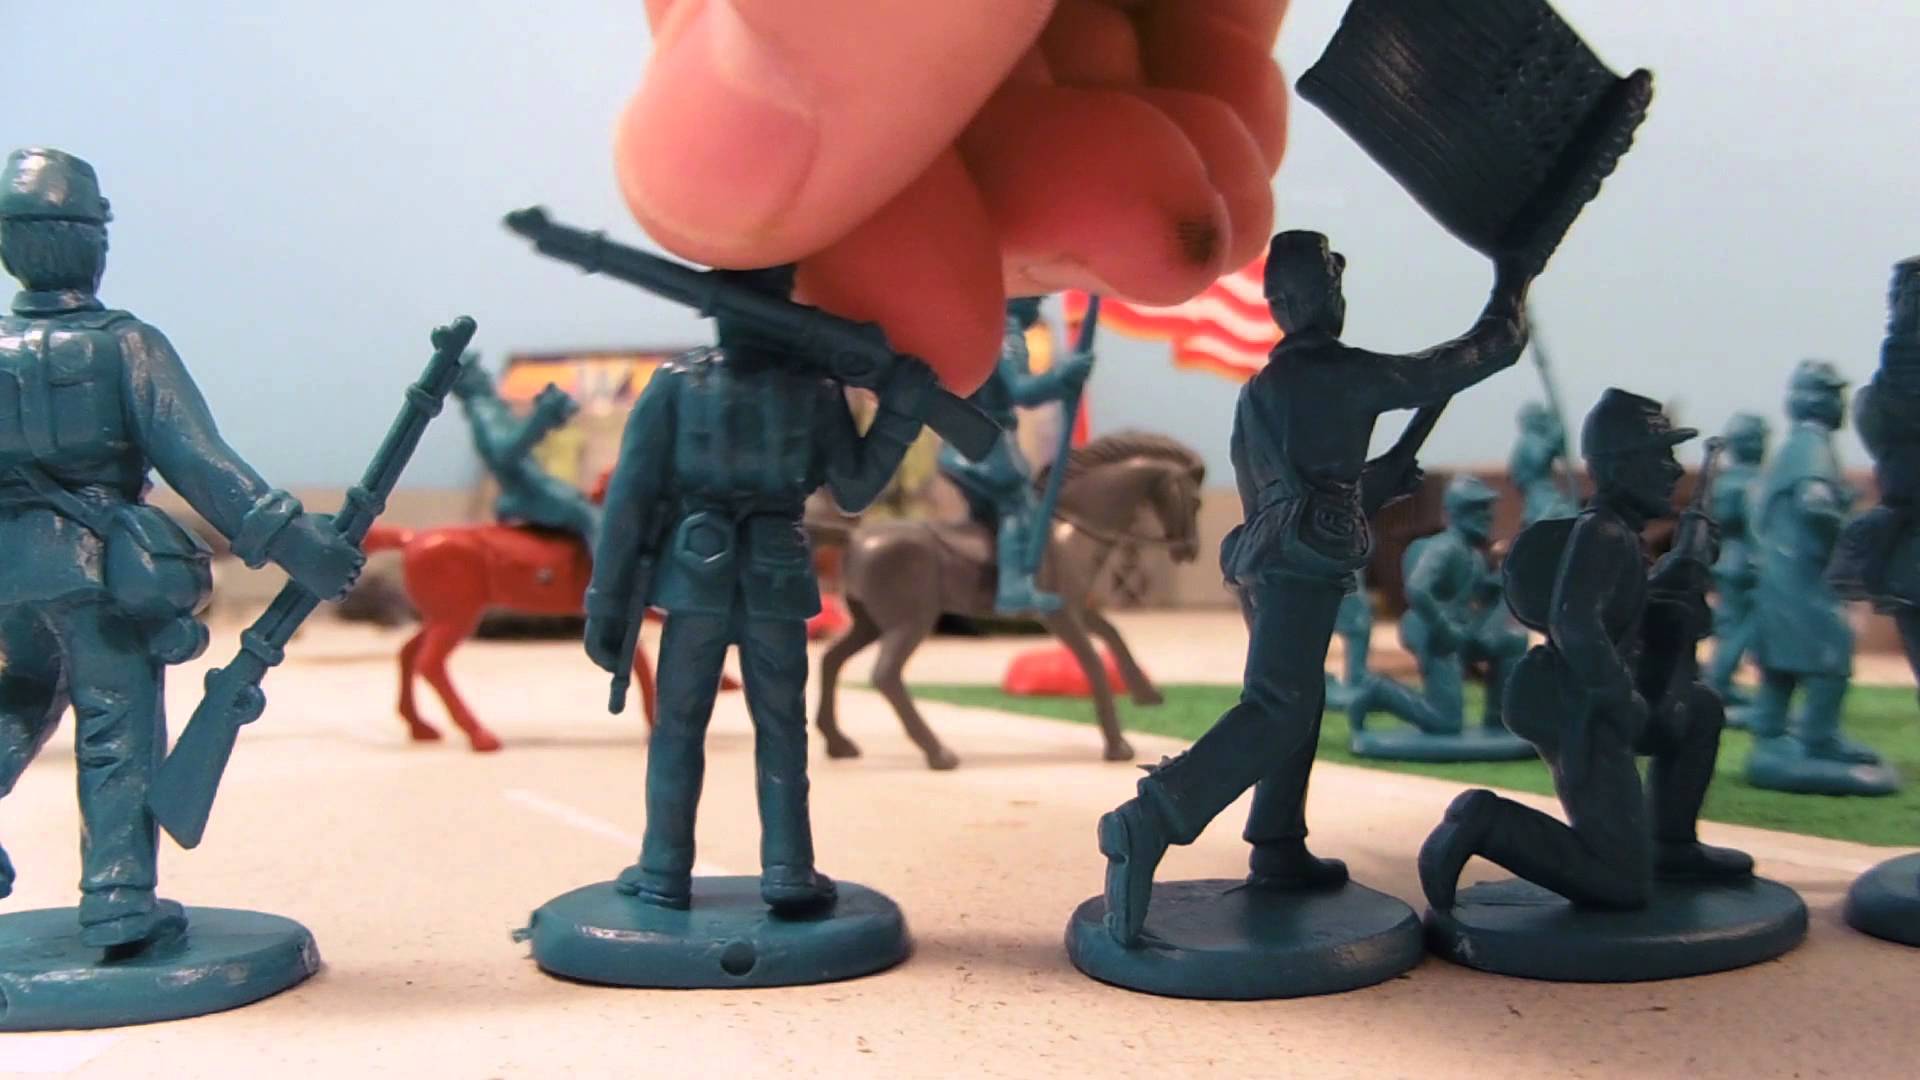 American Civil War Army Men Toy Review! - YouTube